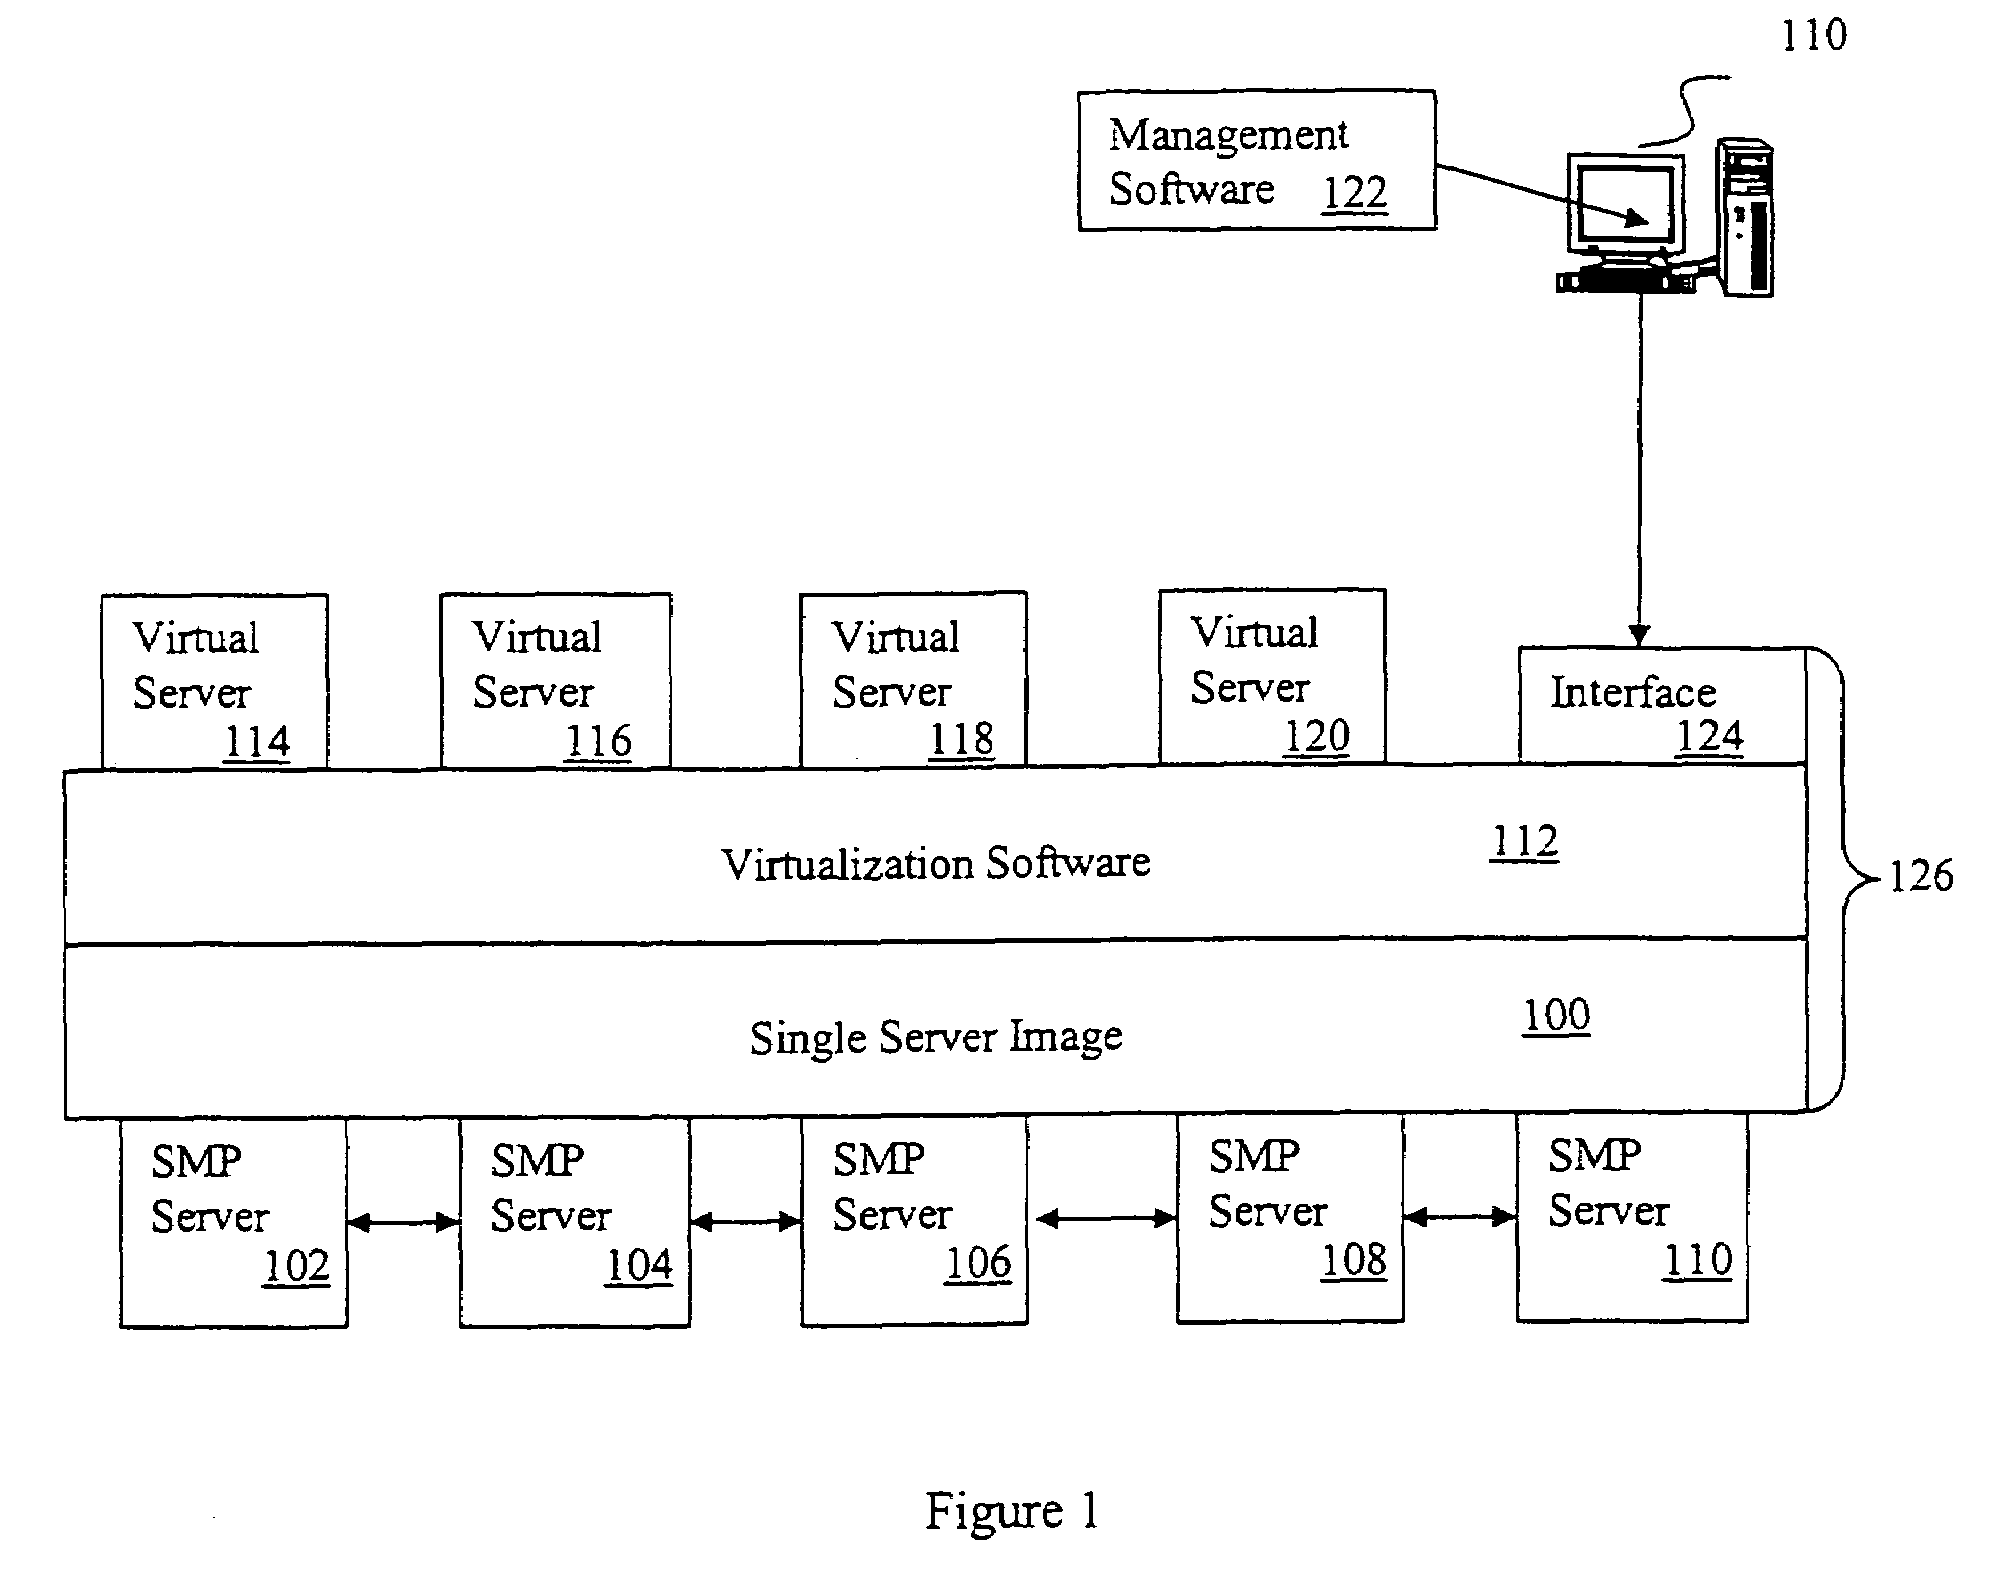 Virtualization and server imaging system for allocation of computer hardware and software